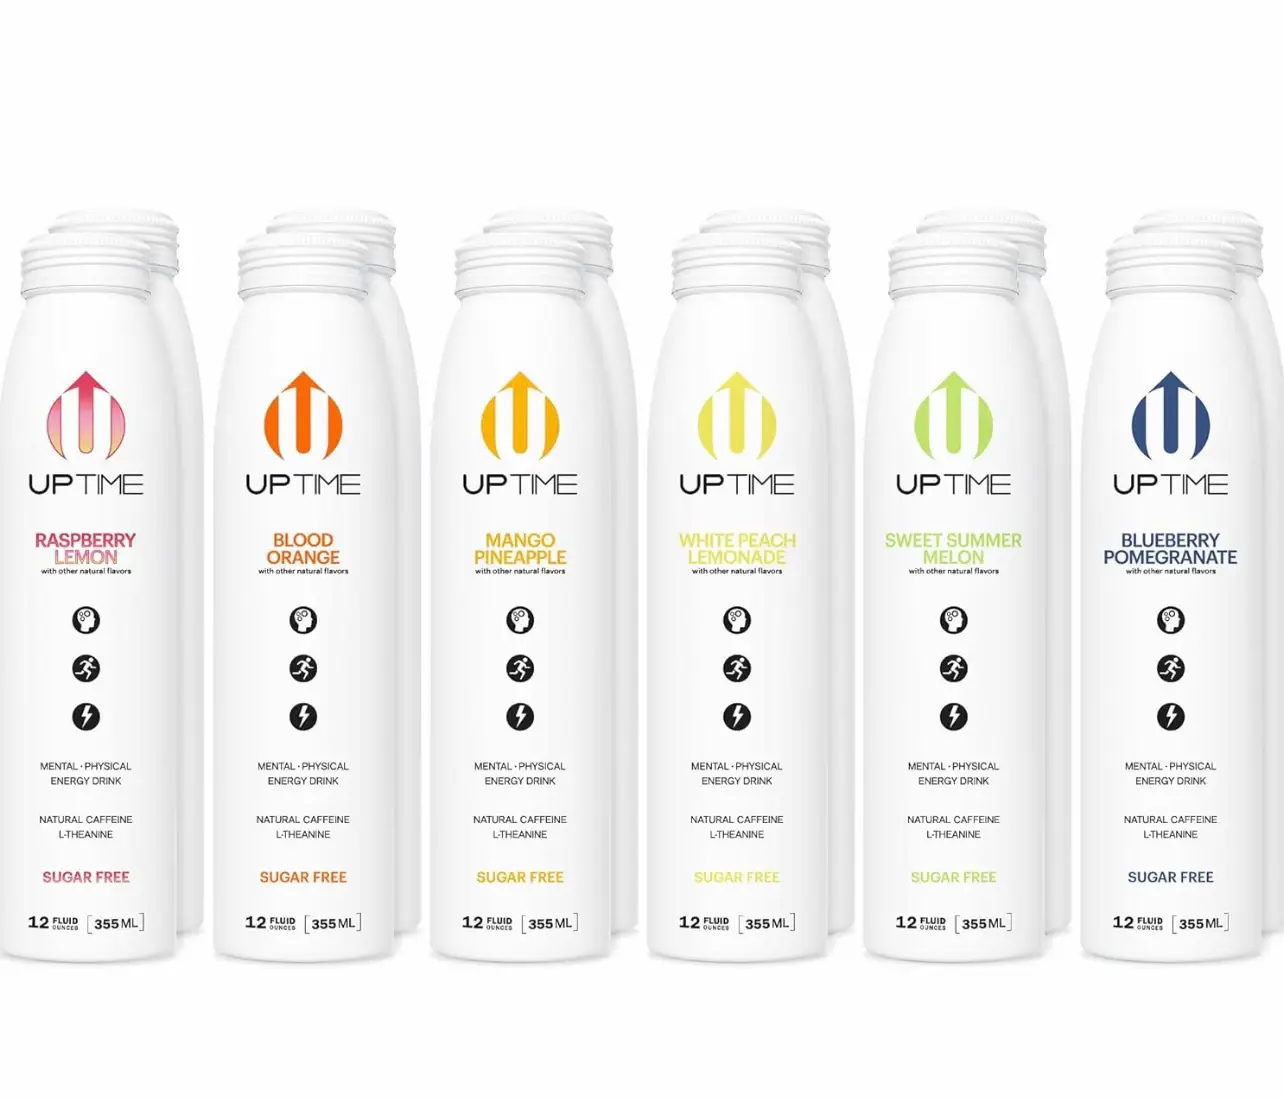 Sugar-free energy drink for fitness enthusiasts - Lemon8 Search